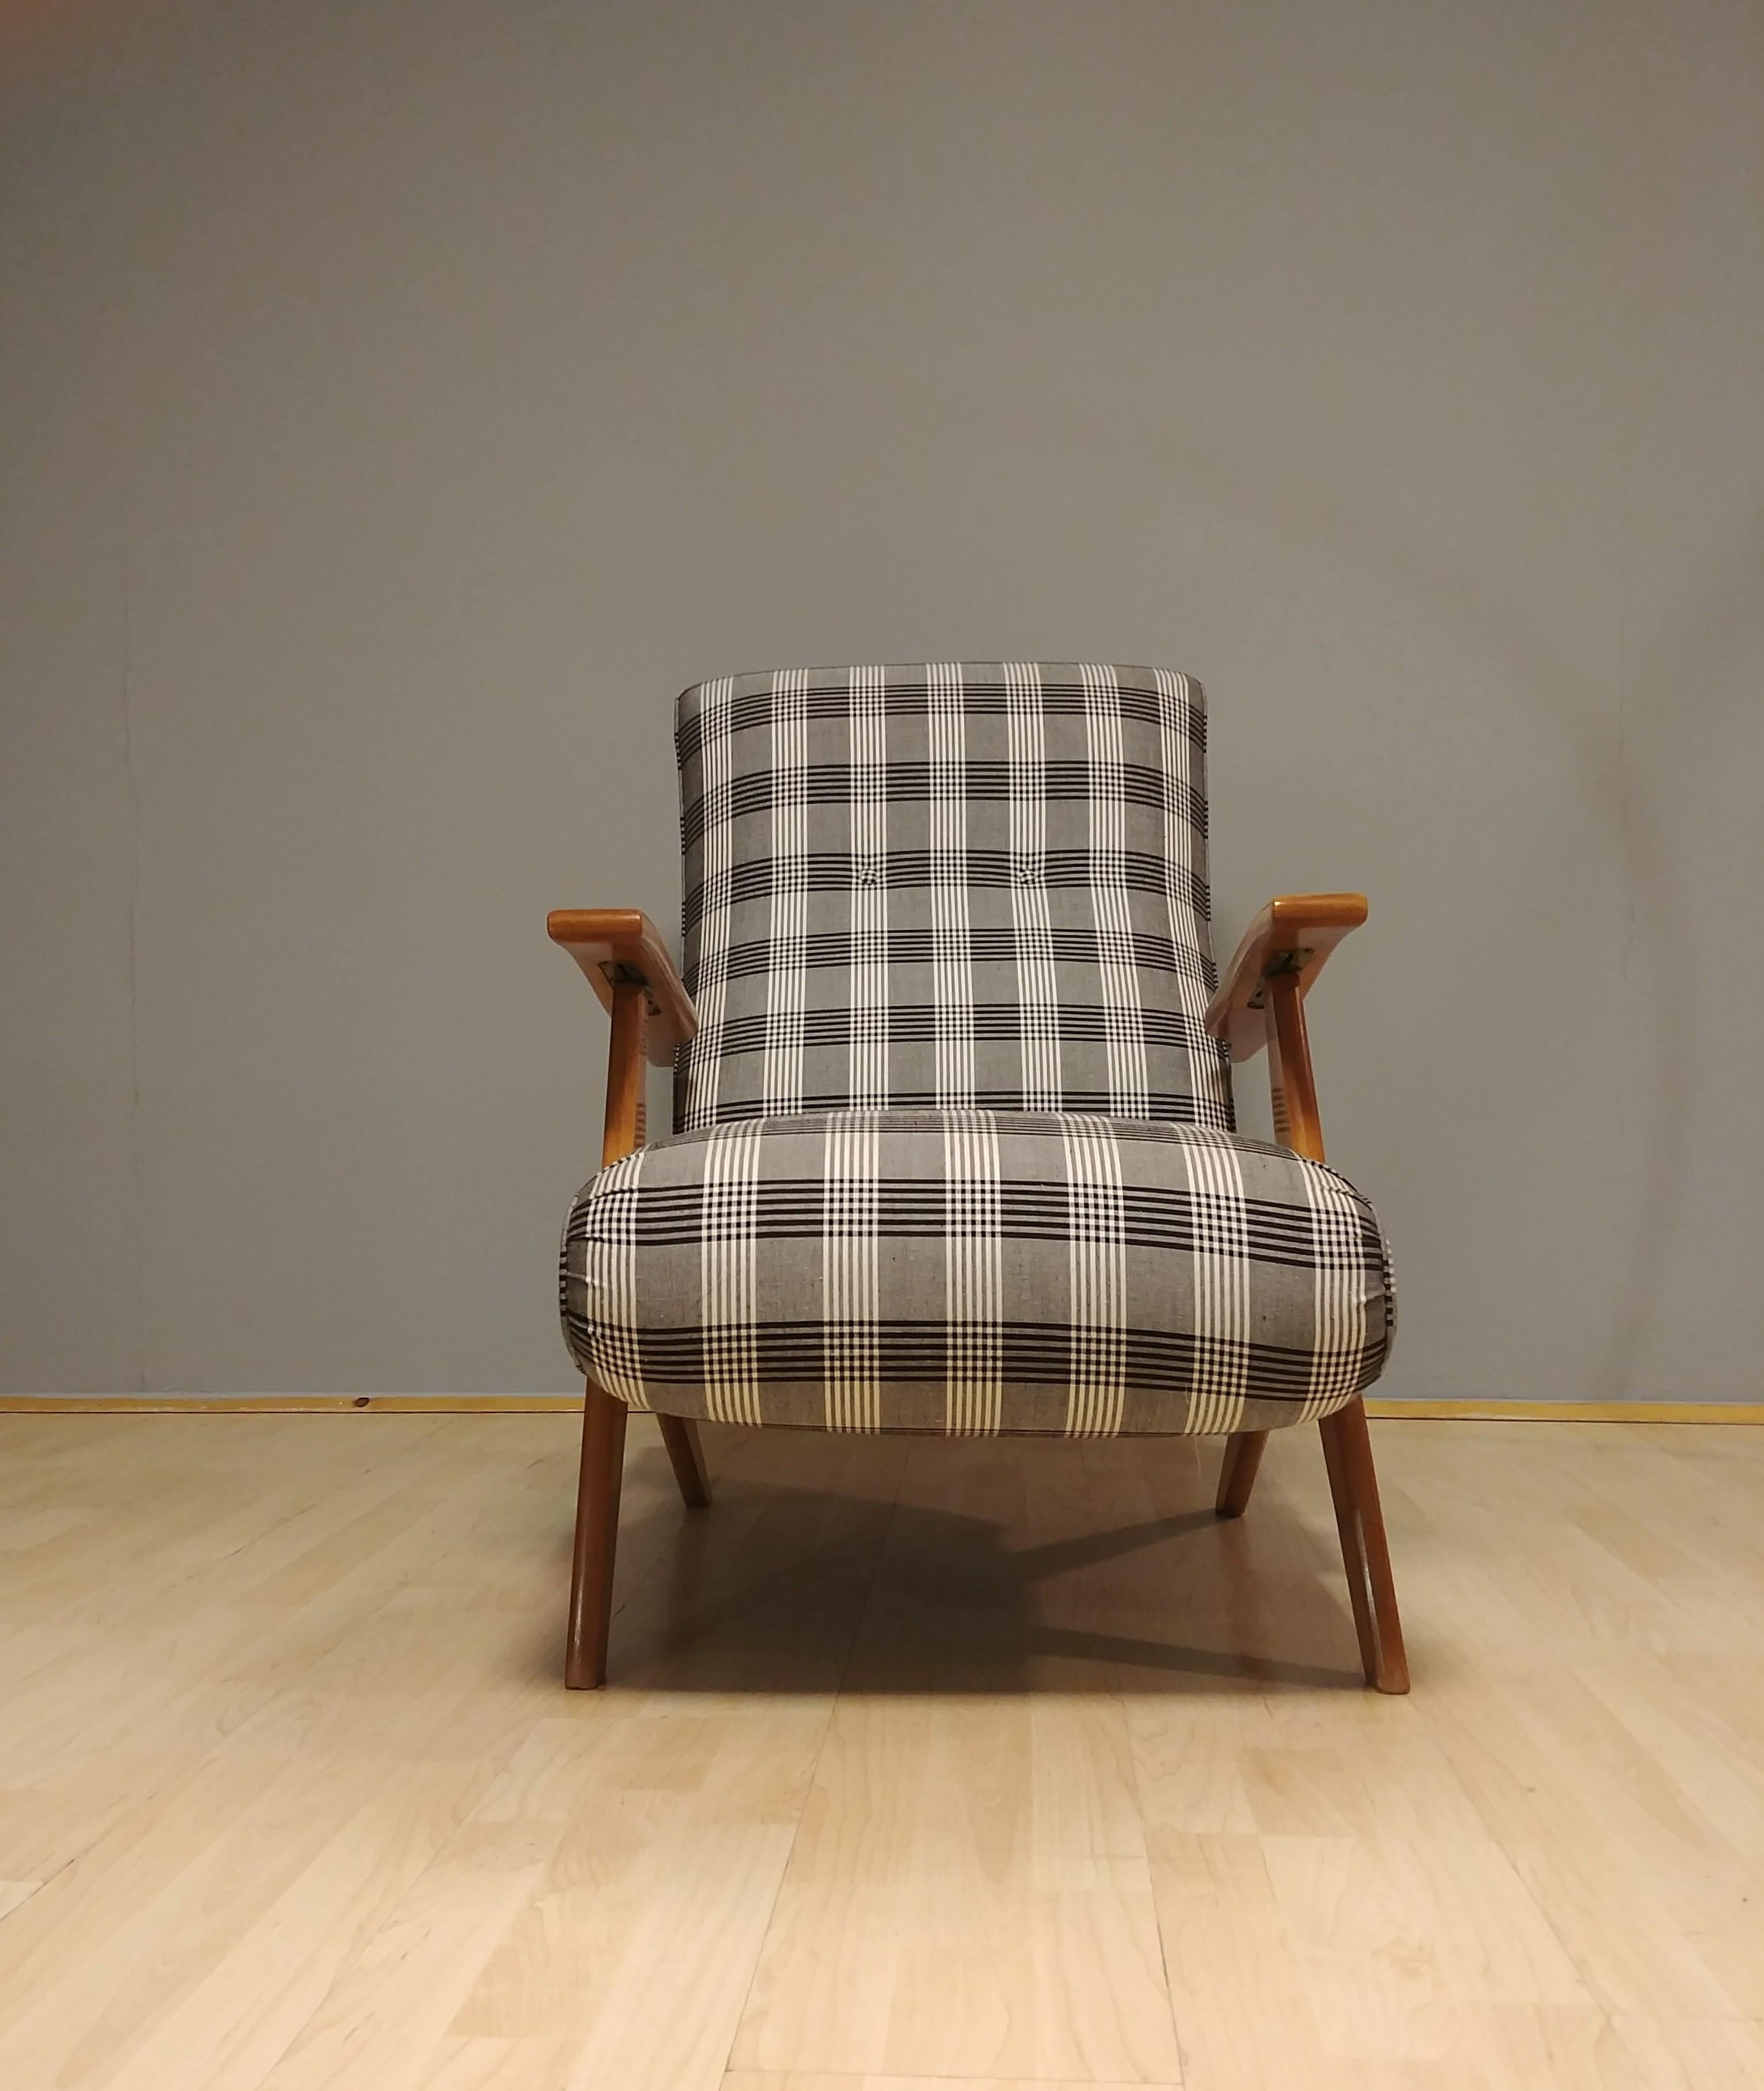 Particular reclining armchair in gray and white striped fabric with wooden structure. Italian production of the 1960s. Unknown designer.